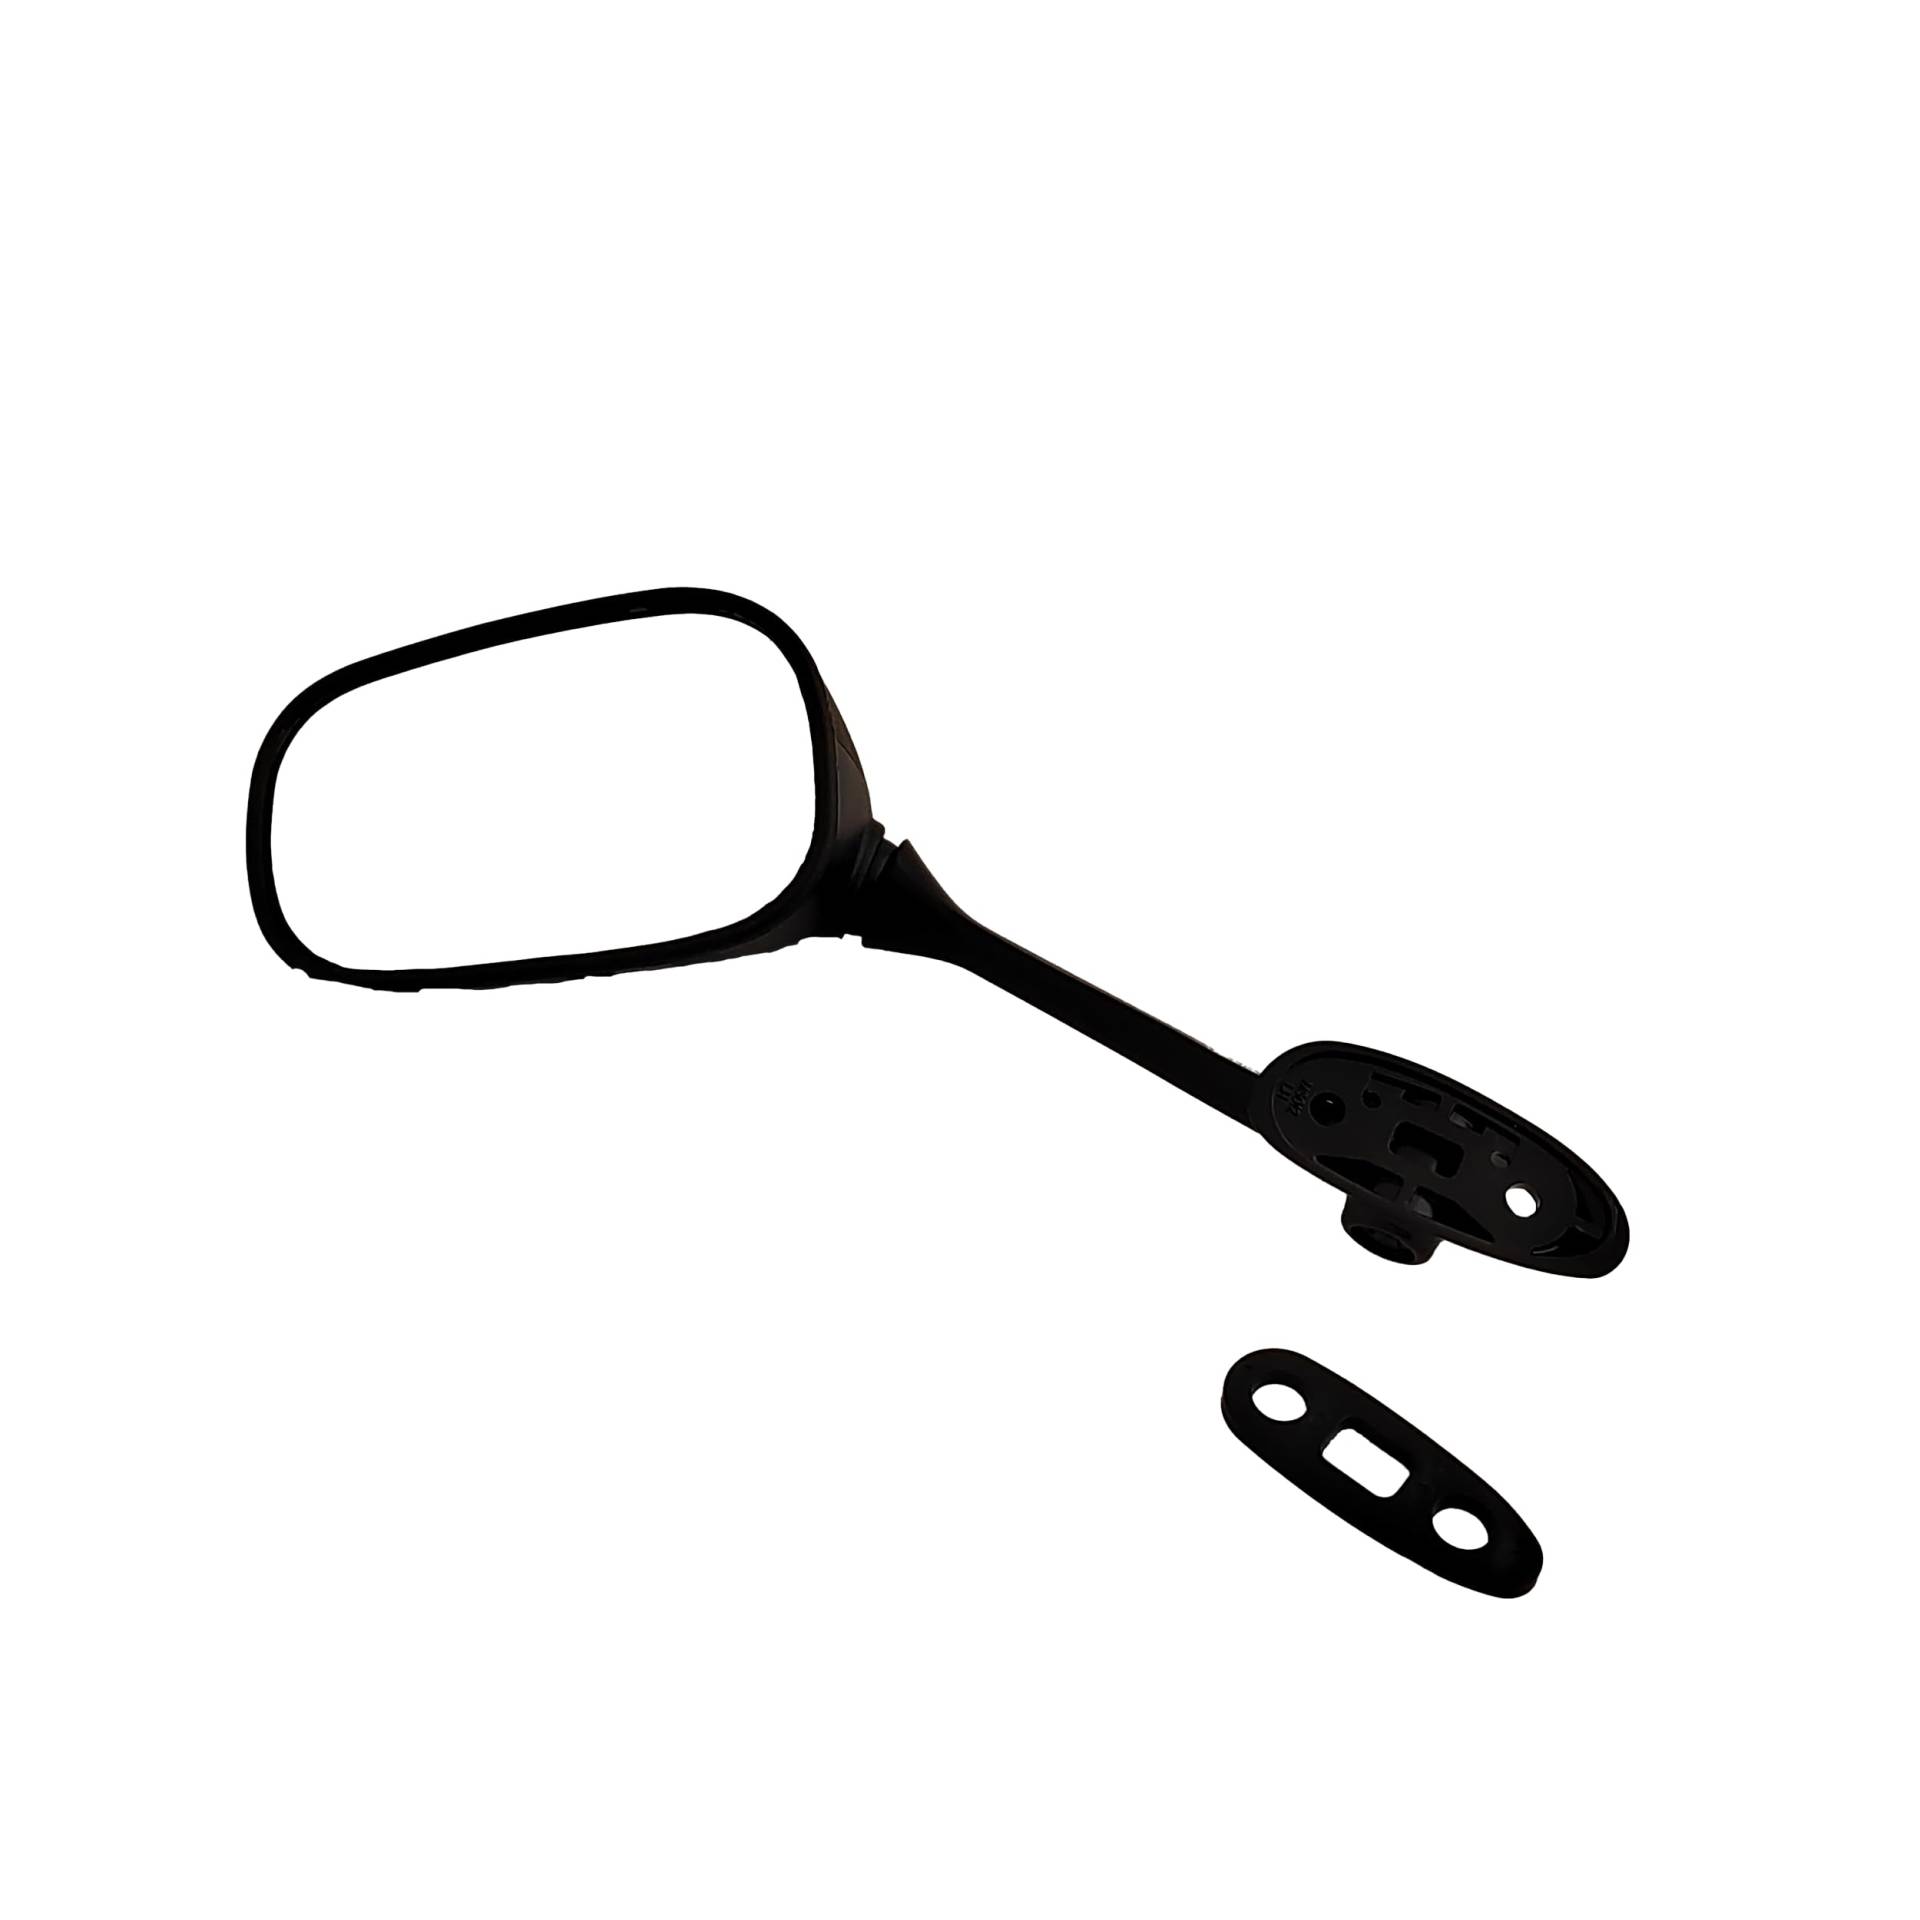 one by Camamoto Left Motorcycle Rearview Mirror for Suzuki Bandit GSF 650 Year from 2009 to 2014, GSF650S 2005 2006 2007 2008 2009 2010 2011 Badit | Original reference 56600-18H00-000 von one